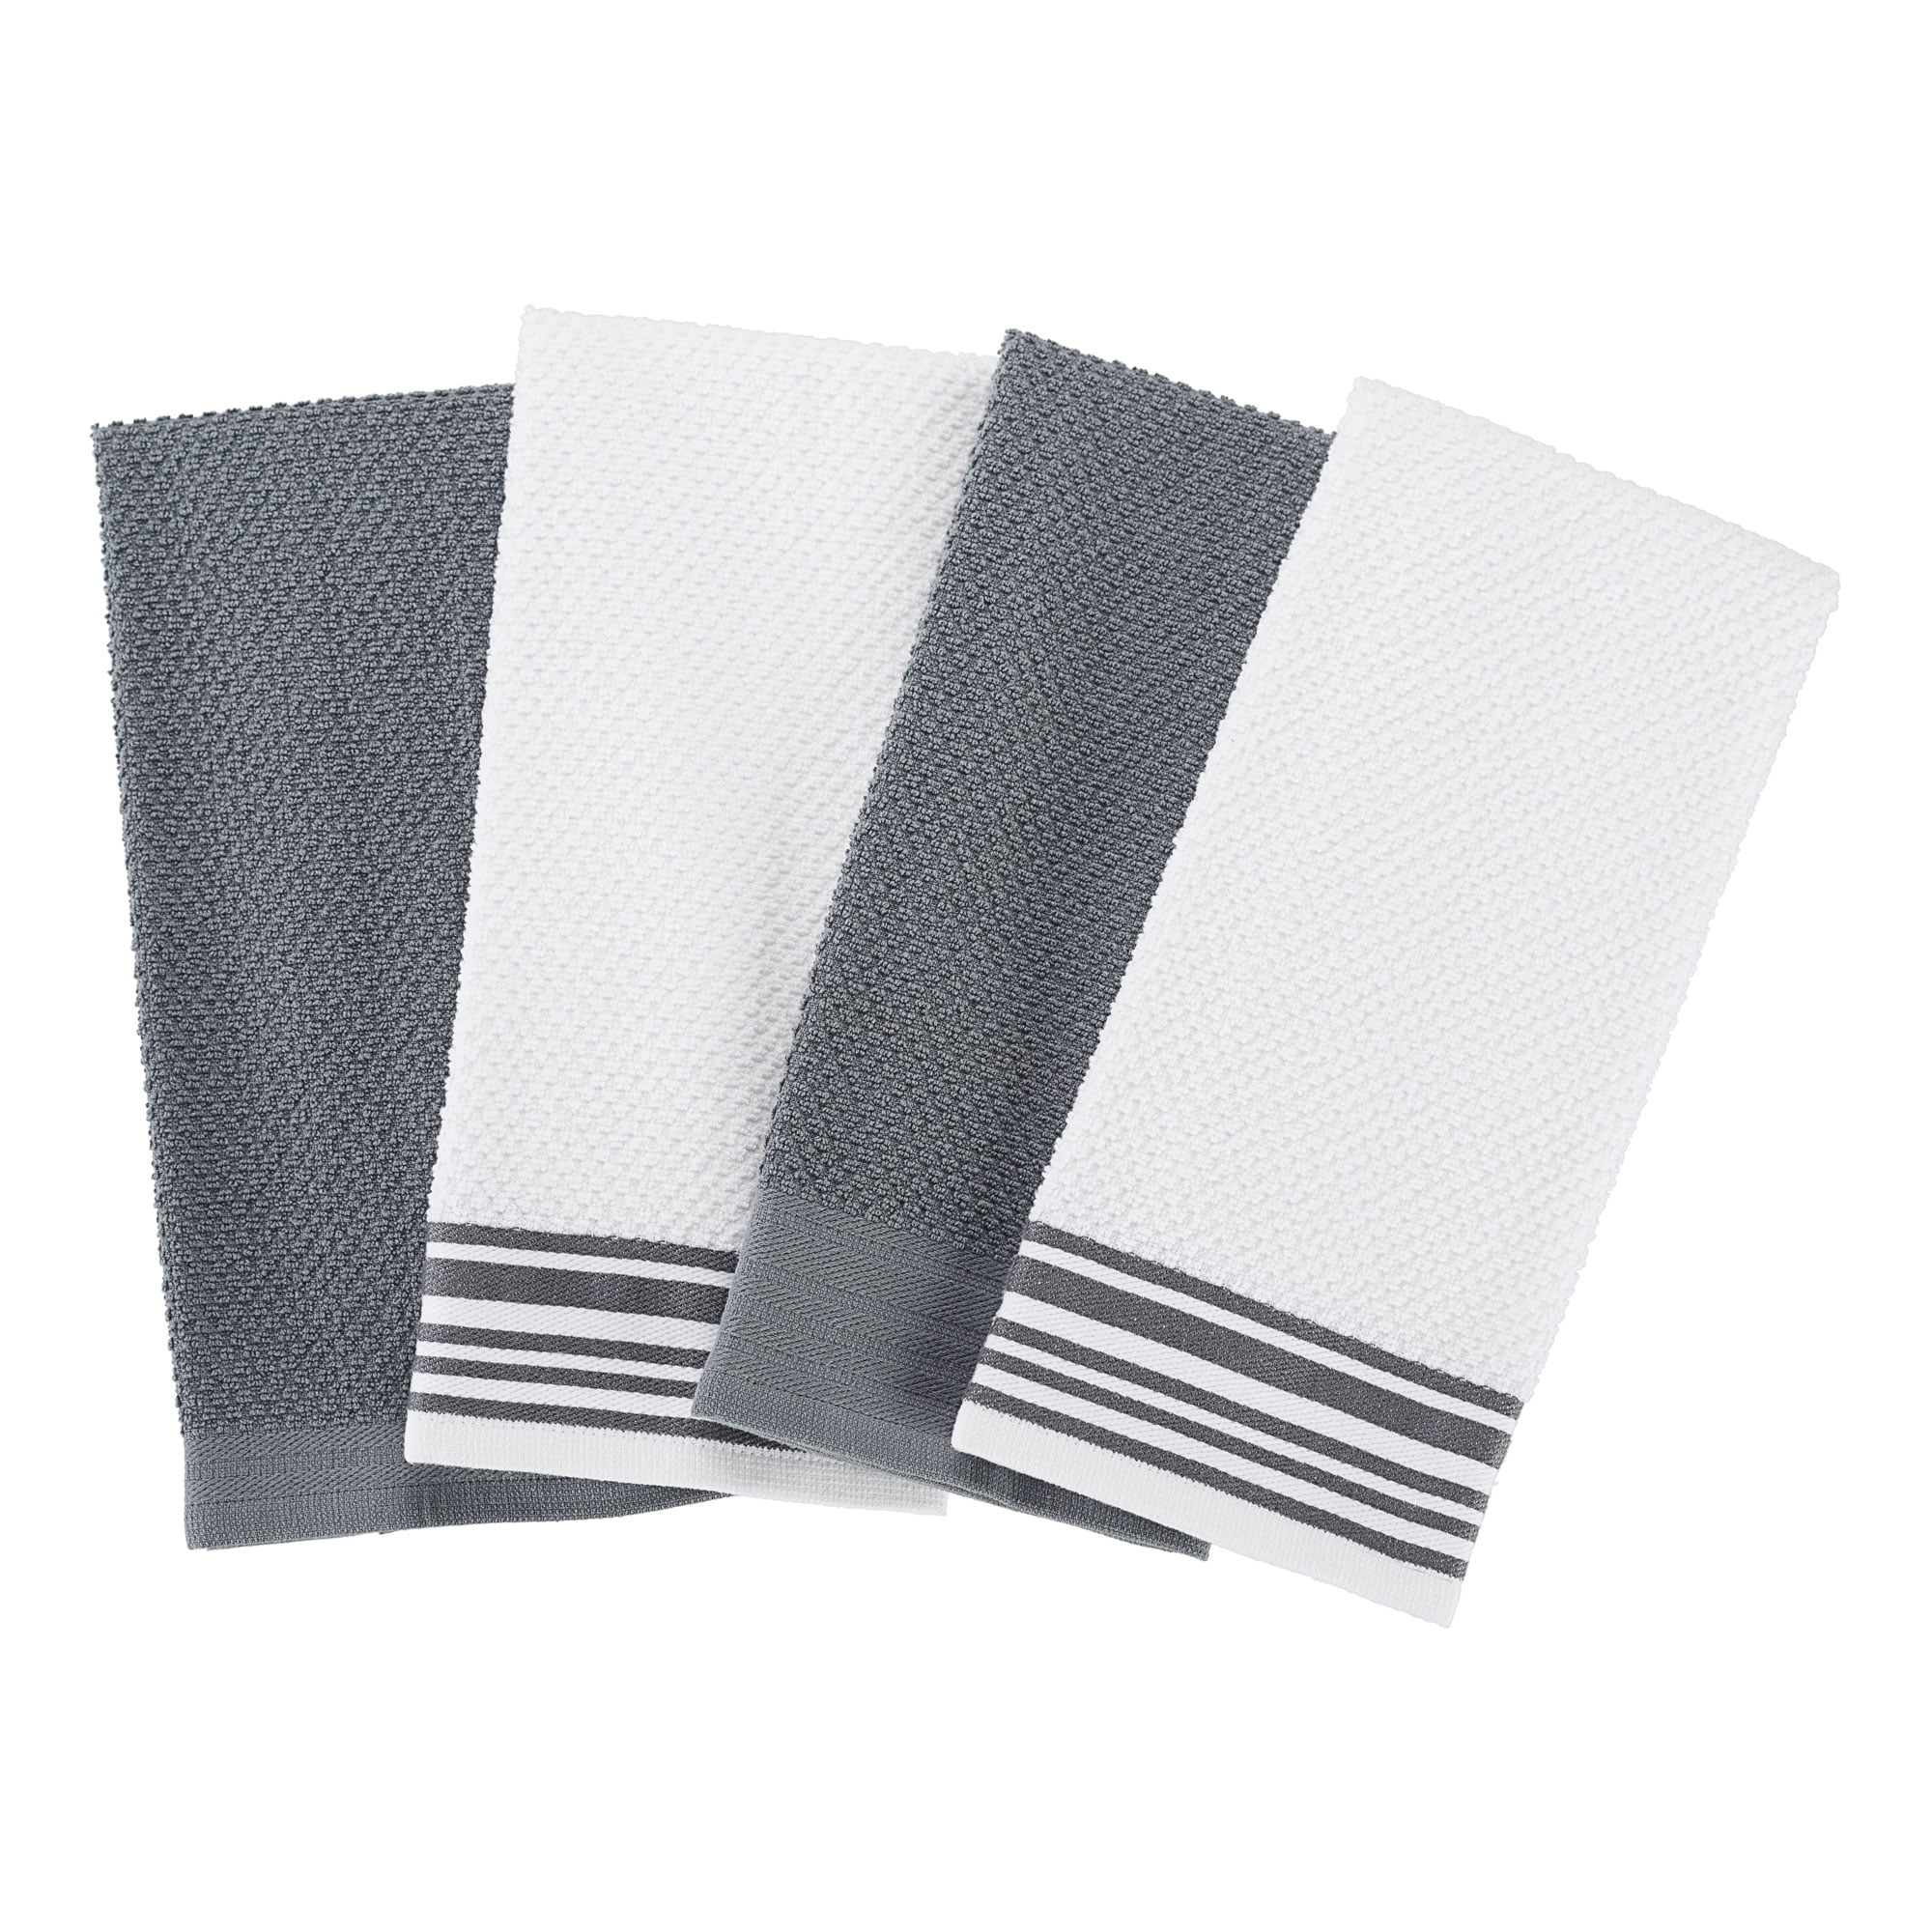 Mainstays 4-Pack 16x26 Woven Kitchen Towel Set, Grey Flannel